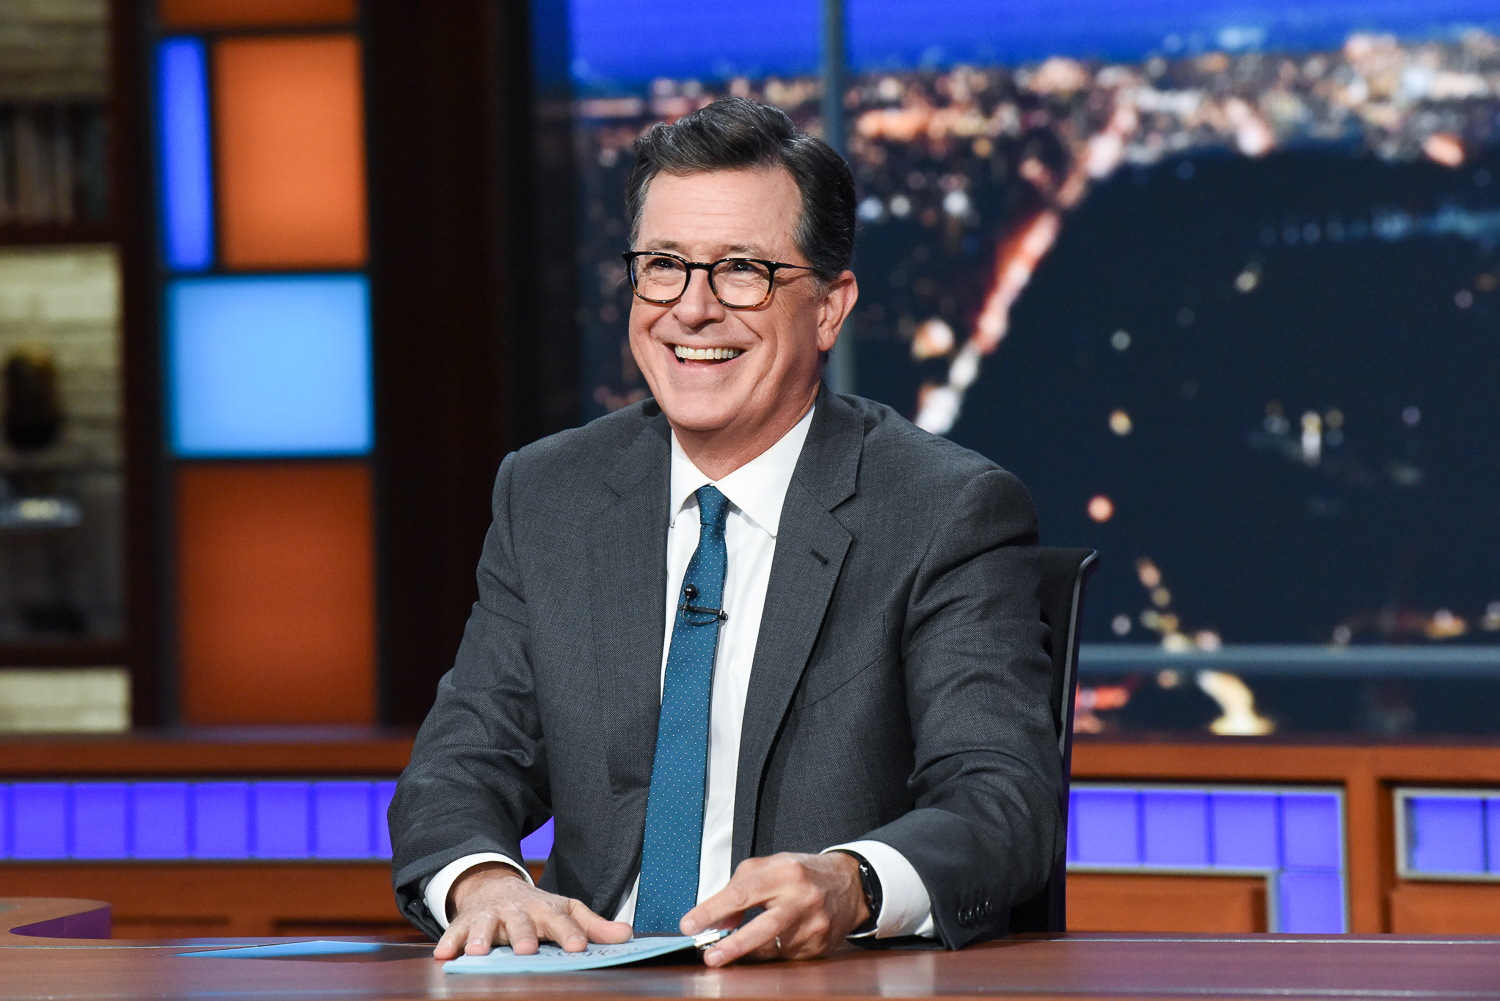 Late Show with Stephen Colbert free stream: How to watch without cable -